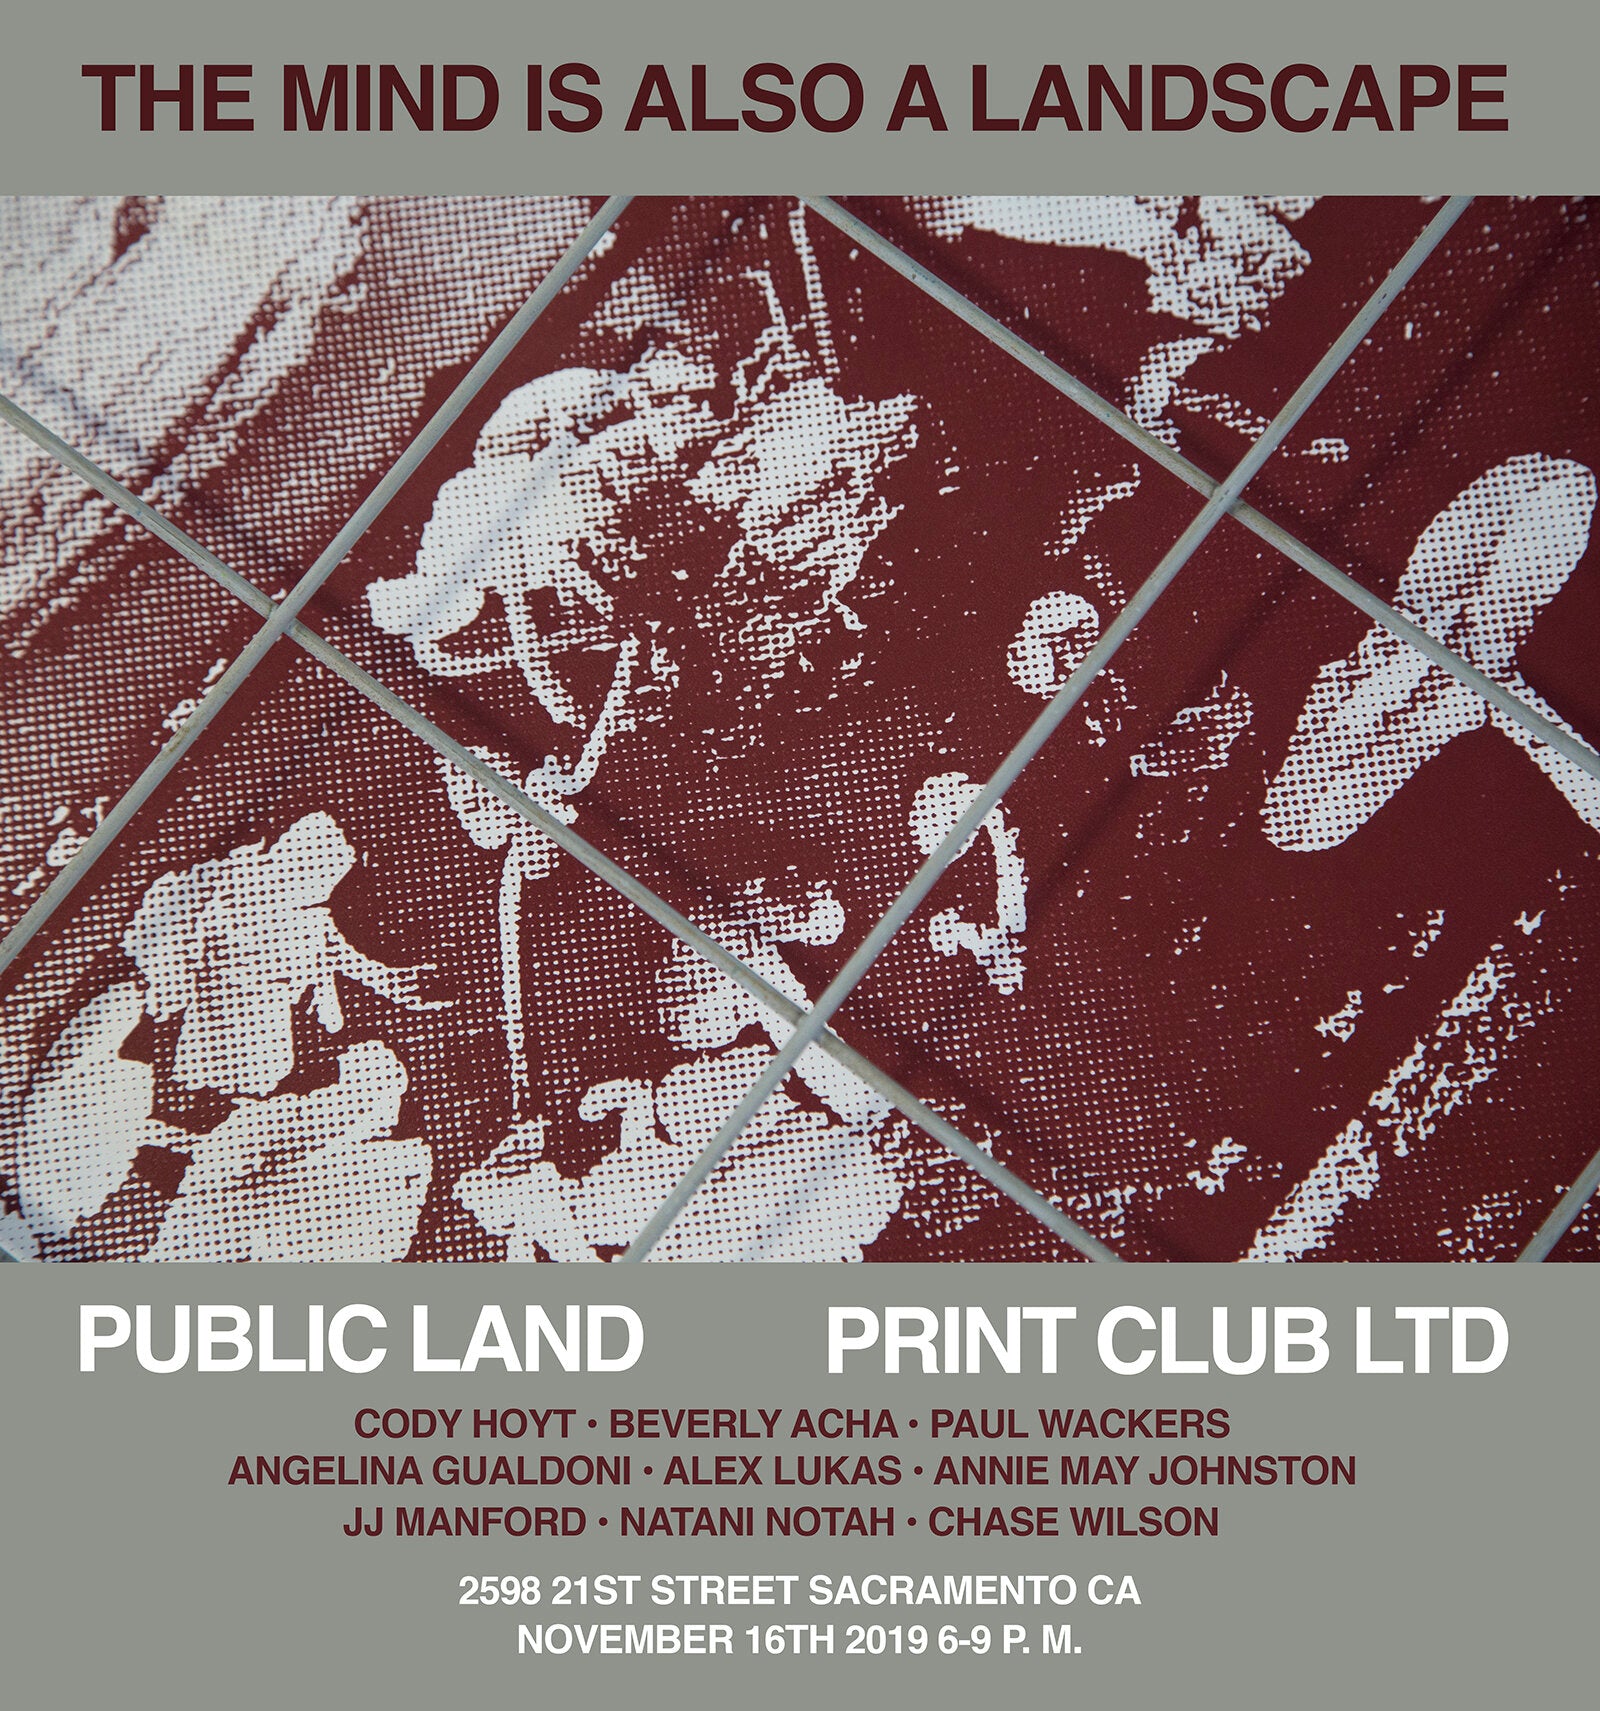 "The Mind Is Also A Landscape" co-curated by Print Club LTD. @ Public Land